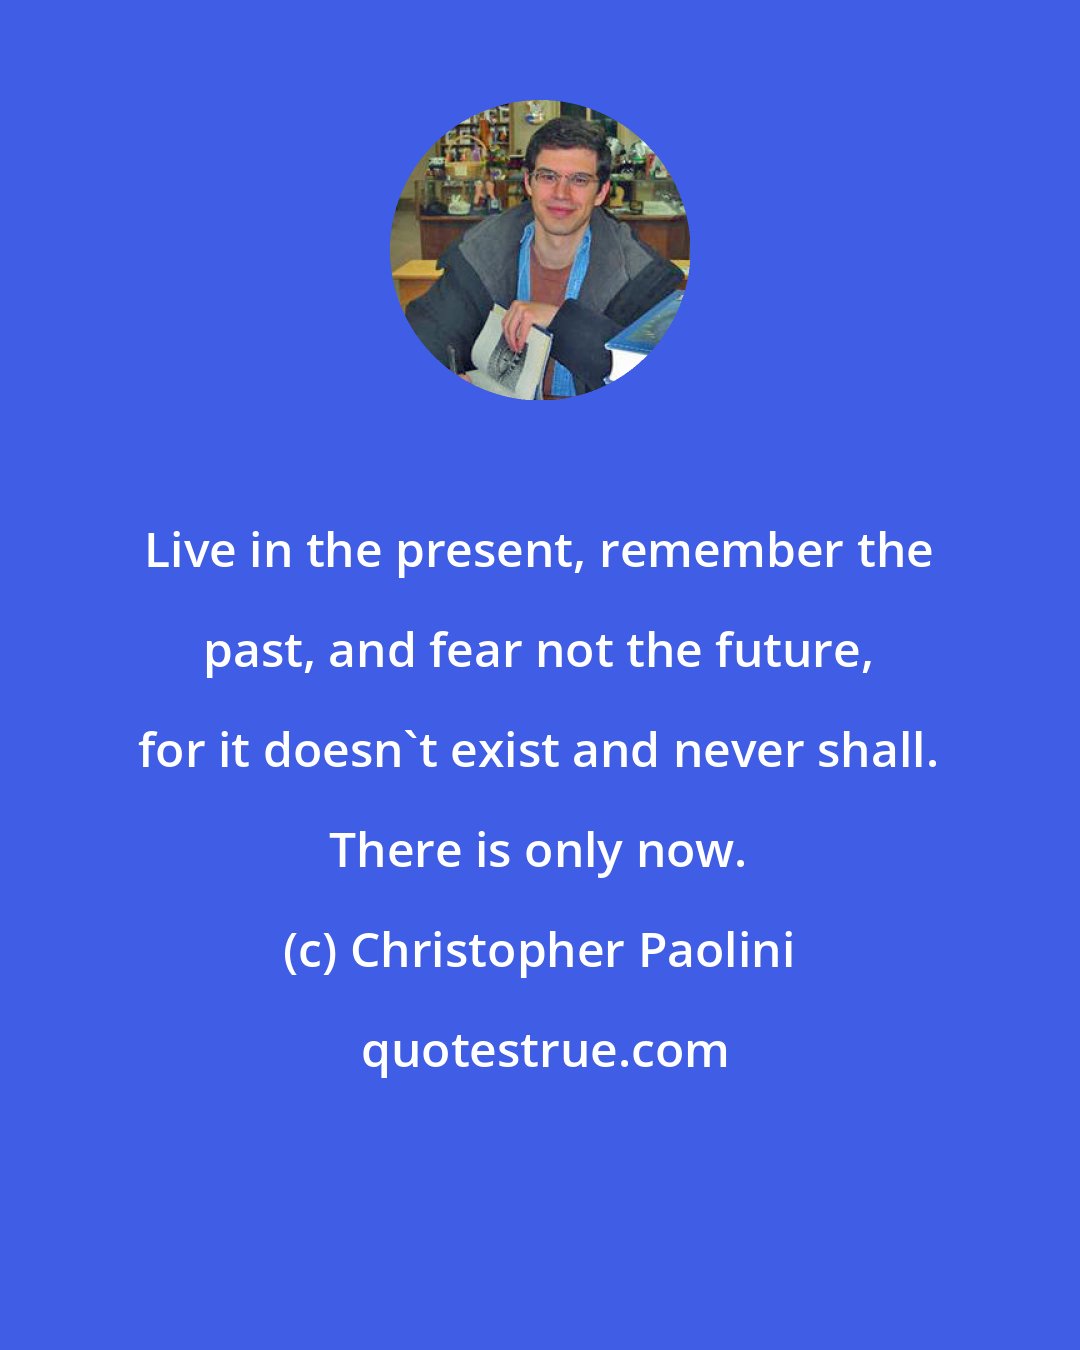 Christopher Paolini: Live in the present, remember the past, and fear not the future, for it doesn't exist and never shall. There is only now.